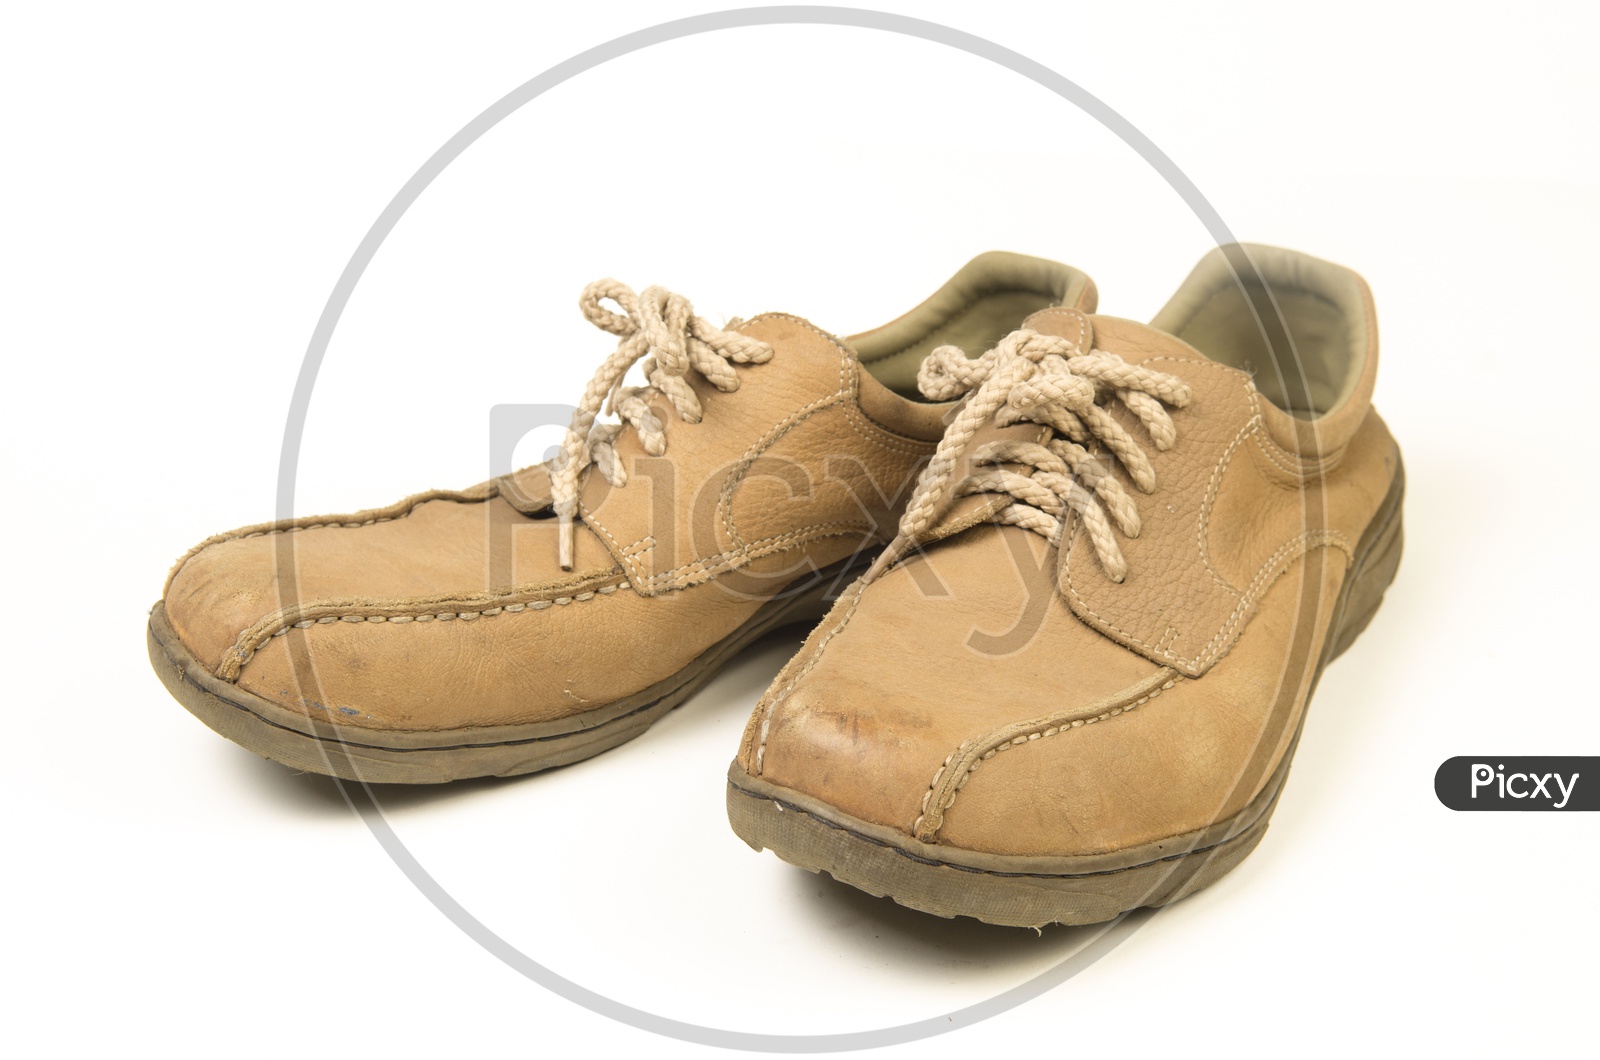 Brown leather men's shoes with wooden shoe stretchers on the side